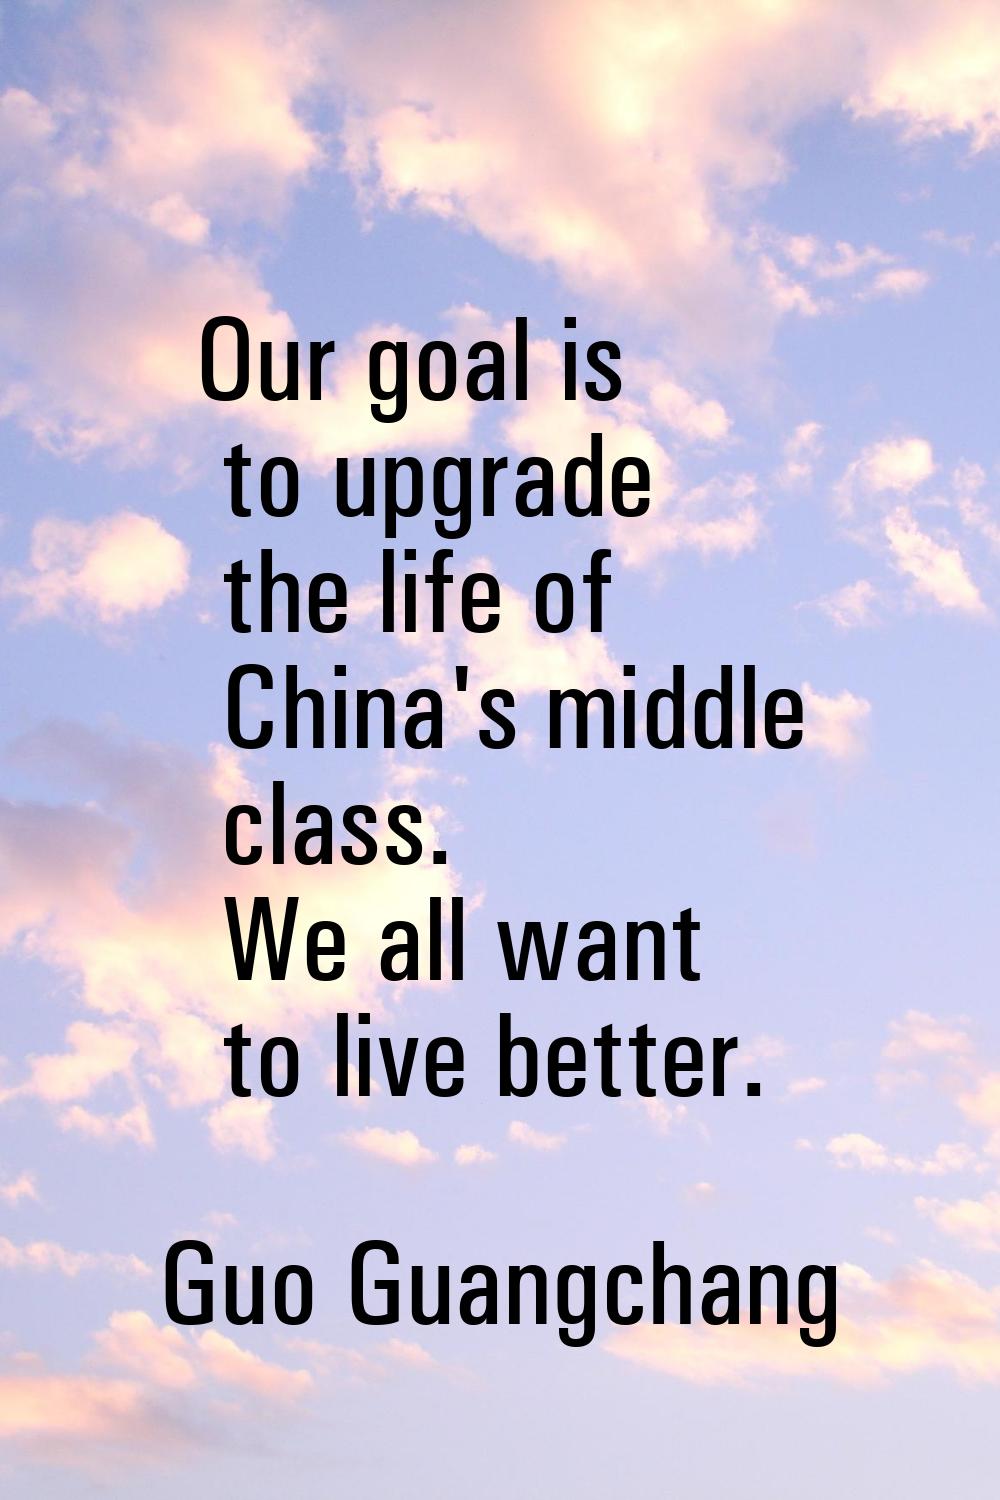 Our goal is to upgrade the life of China's middle class. We all want to live better.